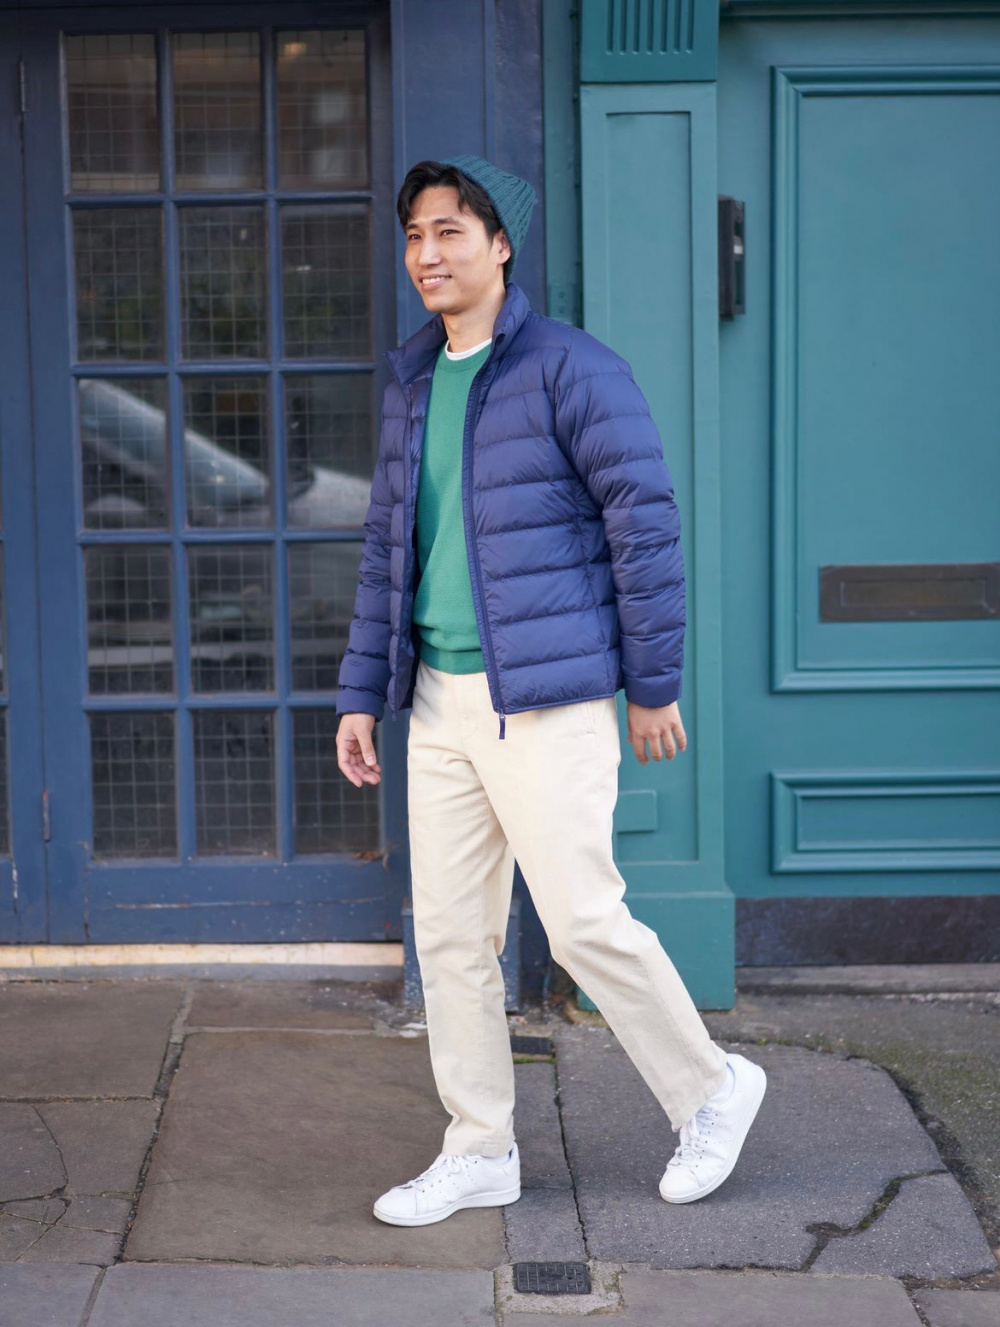 Check styling ideas for「Fleece Full-Zip Jacket、Wide-Fit Chino